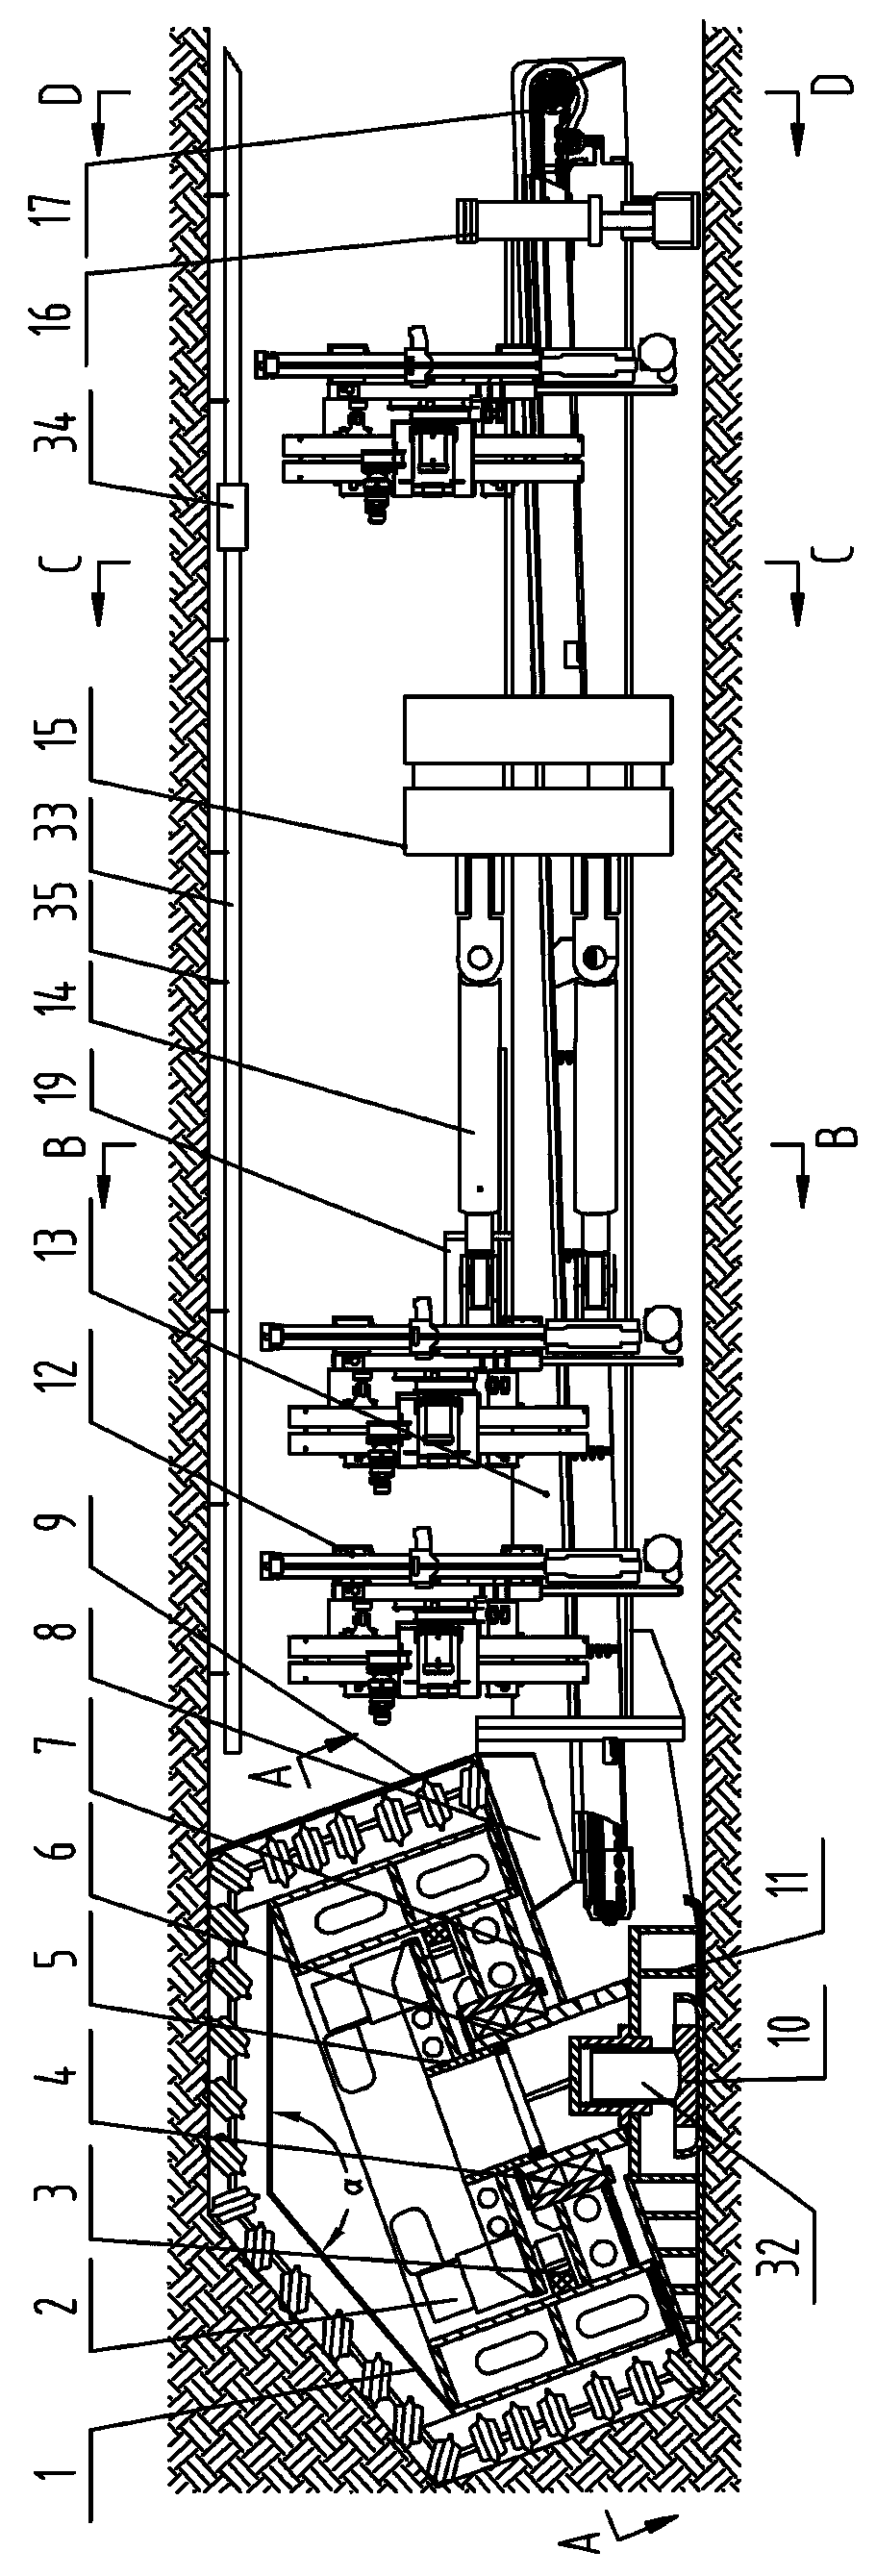 Full-face rectangular hard rock tunneling and anchoring integrated machine